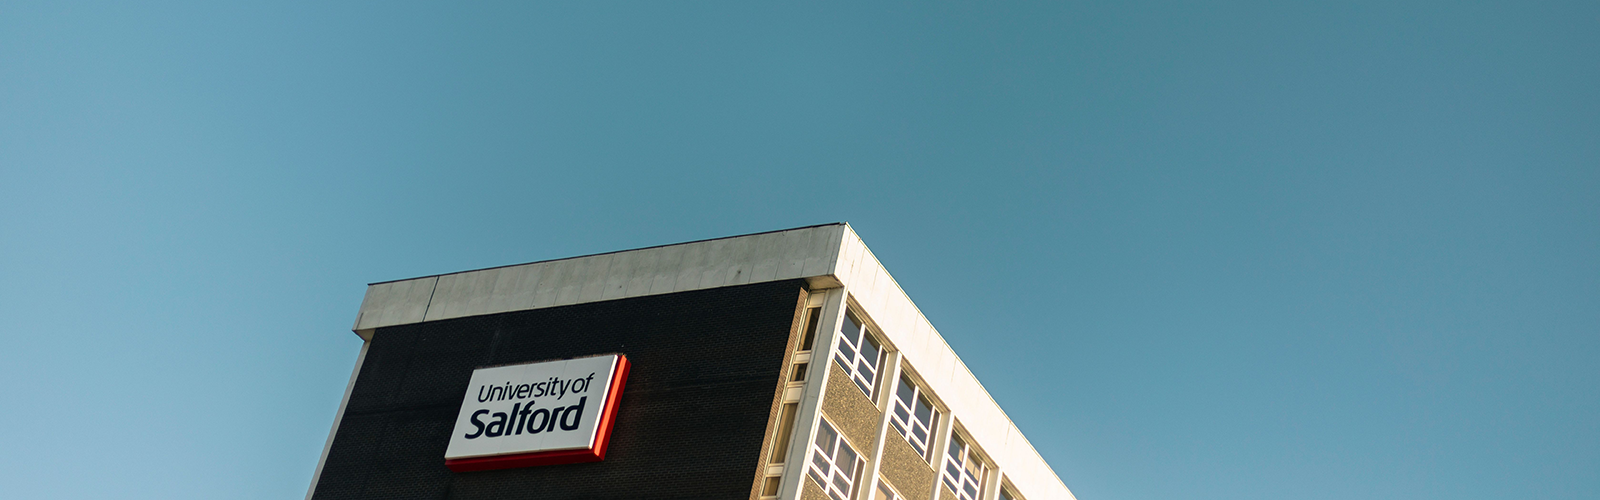 Photo of the top of a University of Salford building against a blue sky